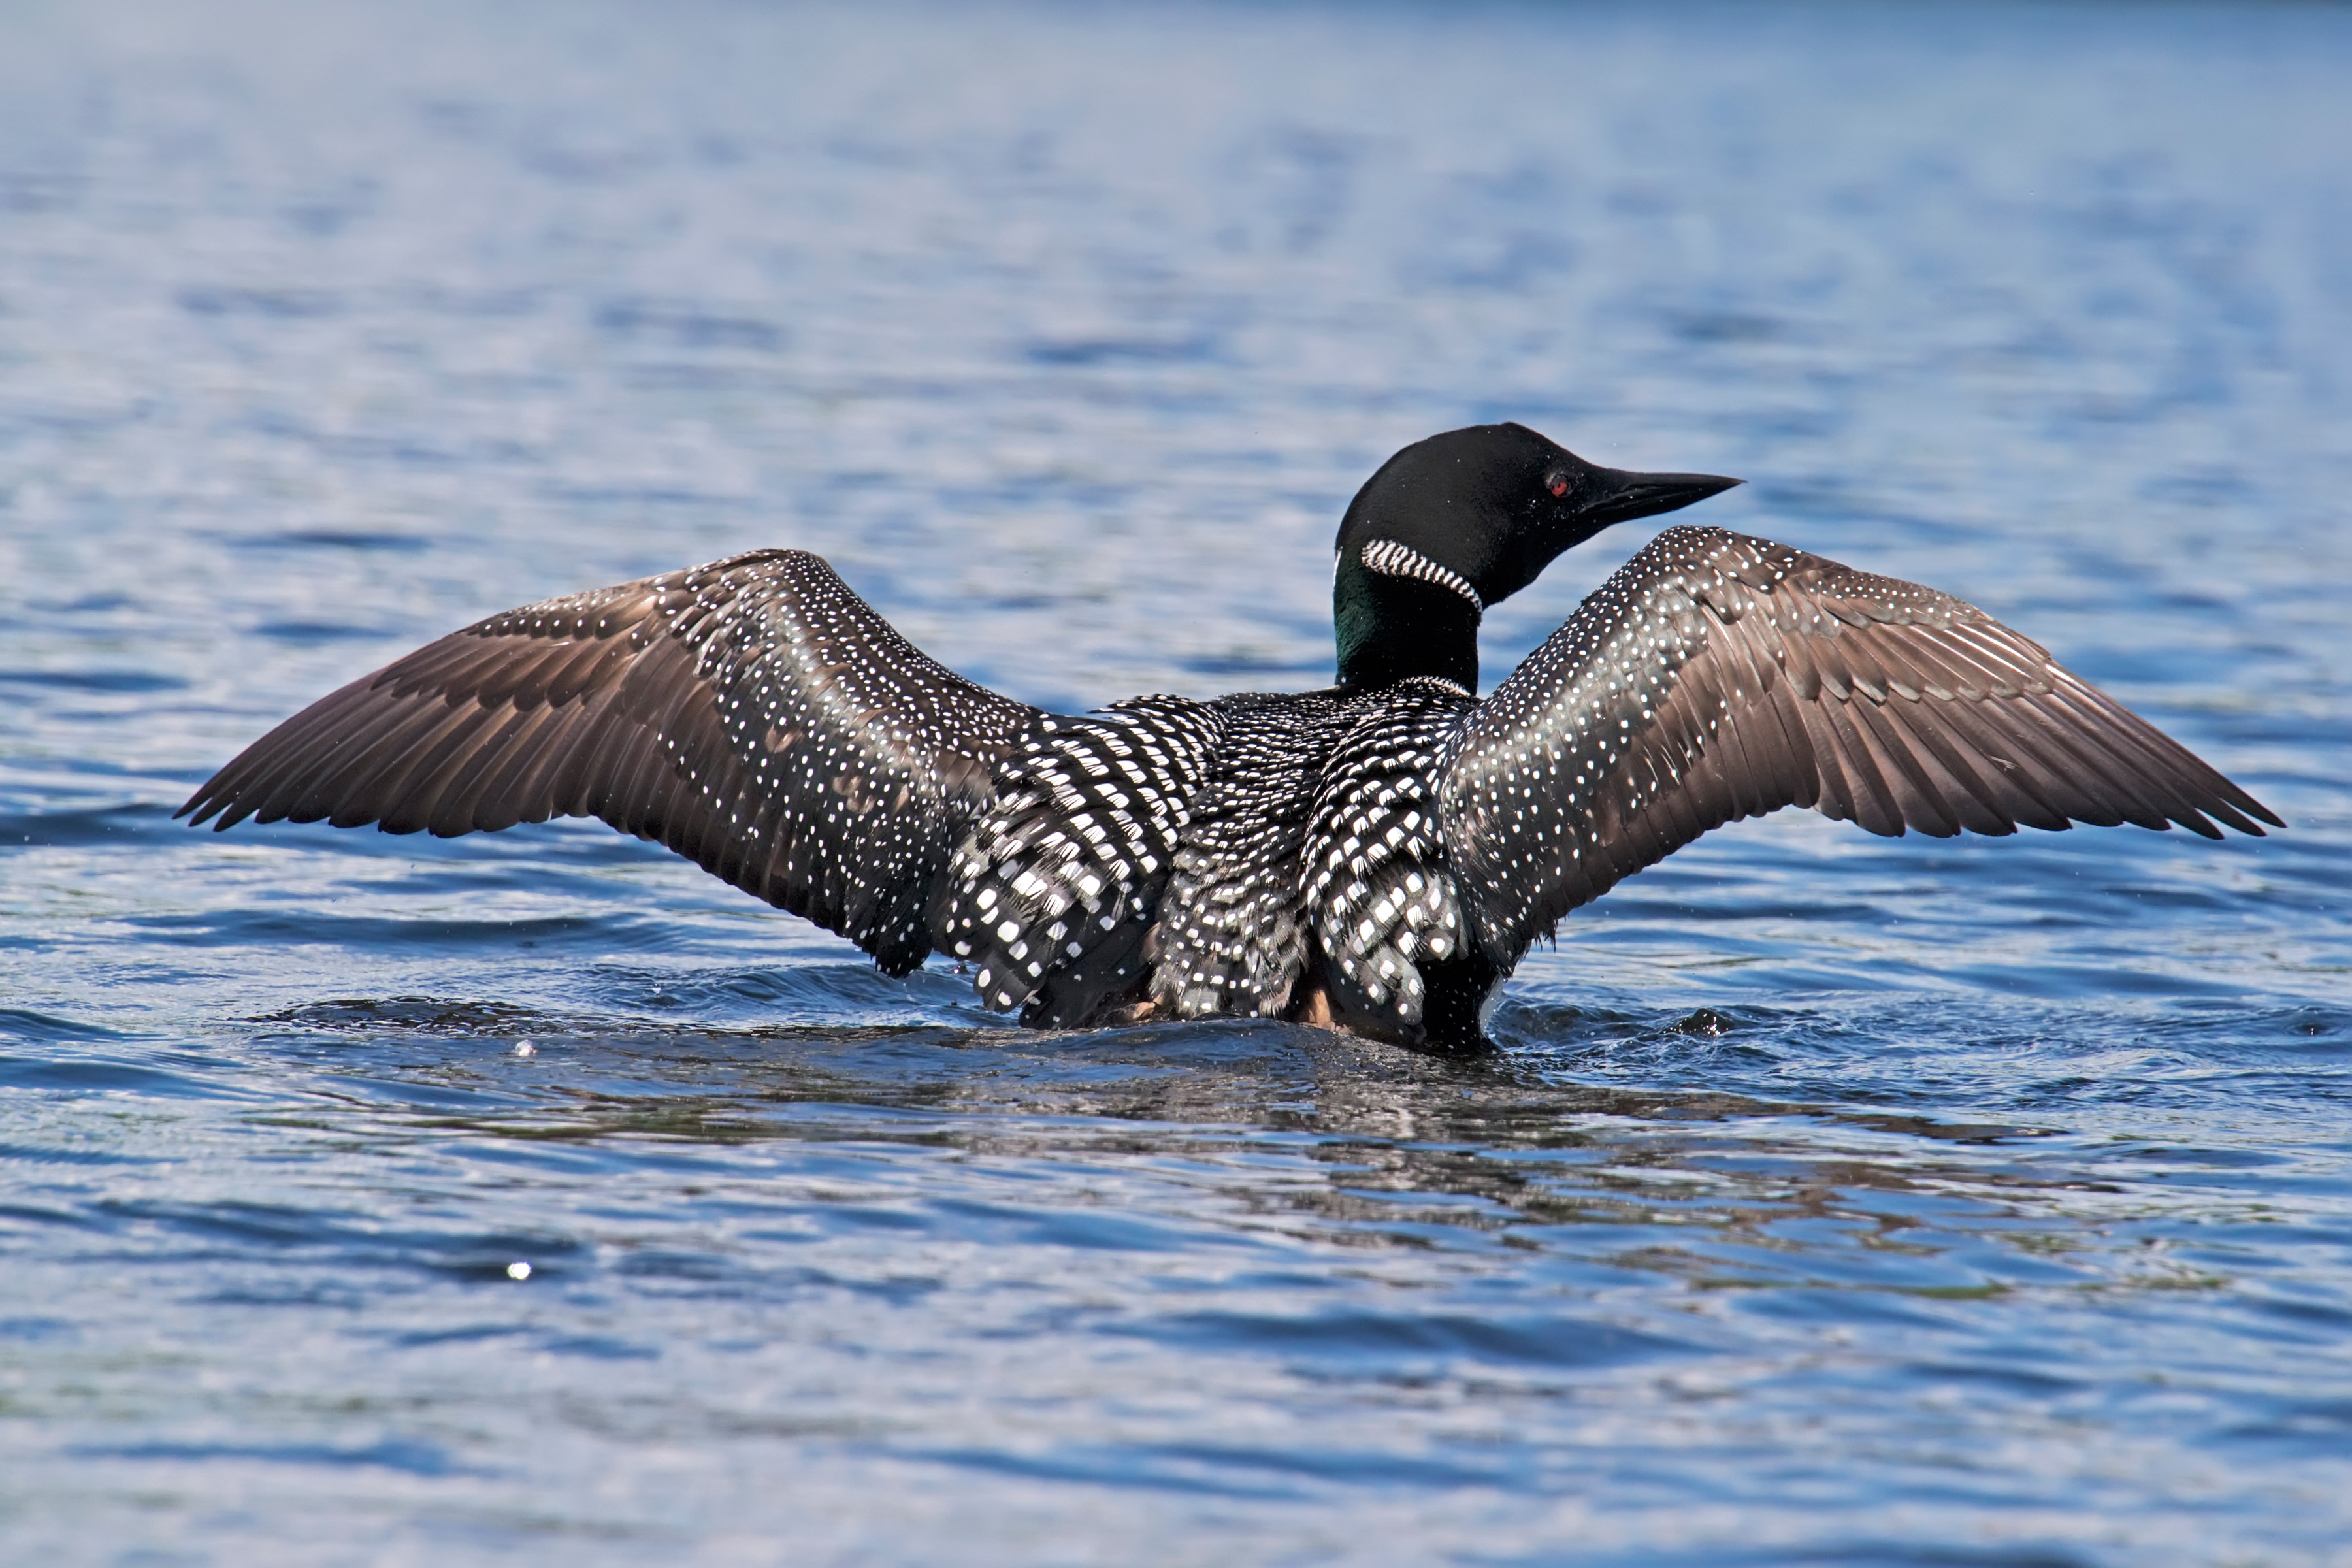 Although Loons are definitely "Party Animals", they spend a lot of time and skill in parenting